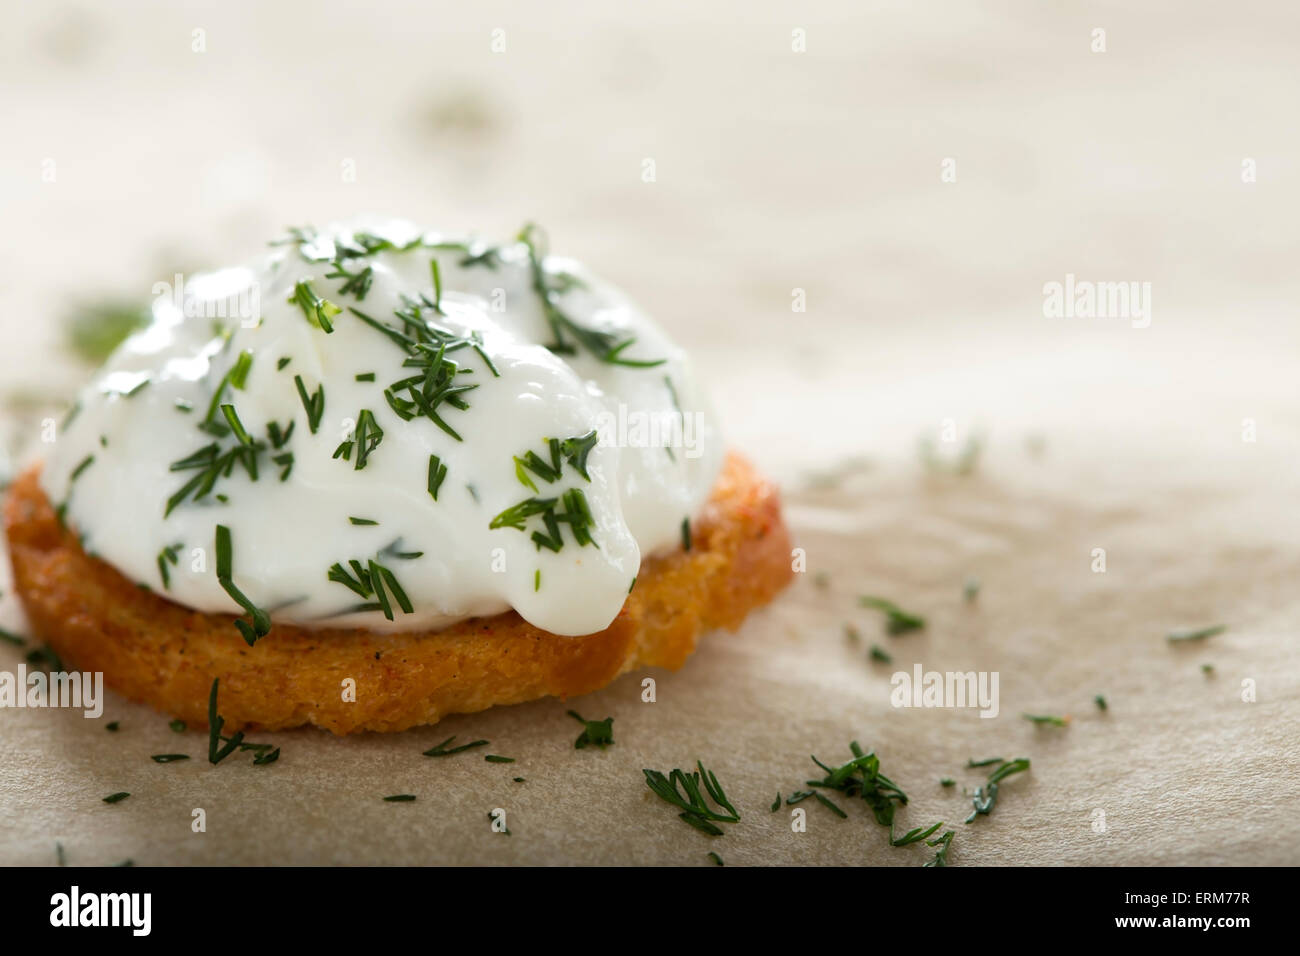 Close up of one fresh cream cheese spread with dill on bake rolls Stock Photo